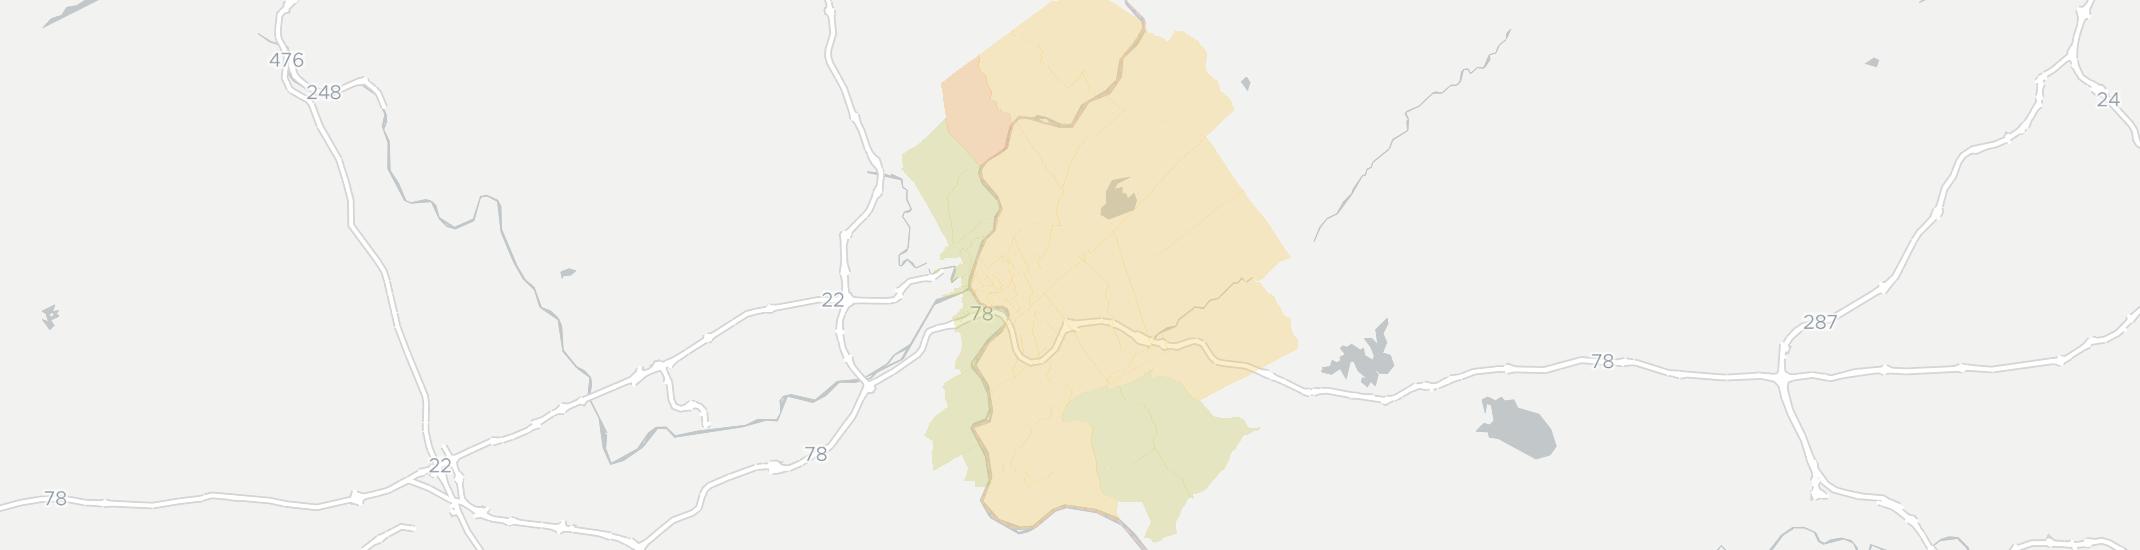 Phillipsburg Internet Competition Map. Click for interactive map.